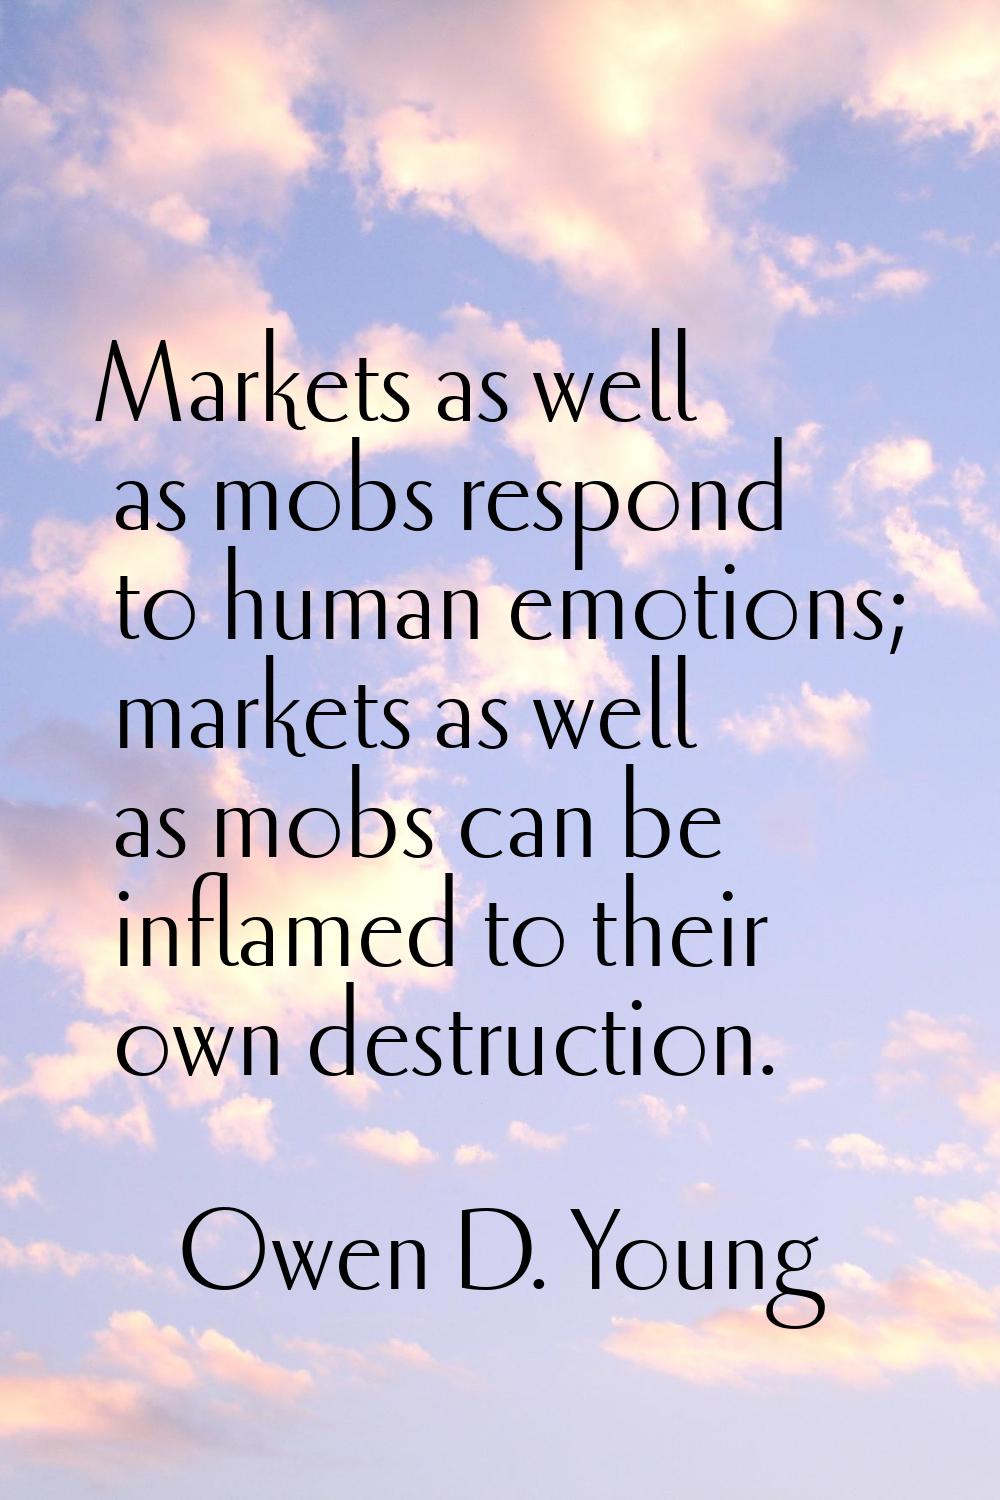 Markets as well as mobs respond to human emotions; markets as well as mobs can be inflamed to their